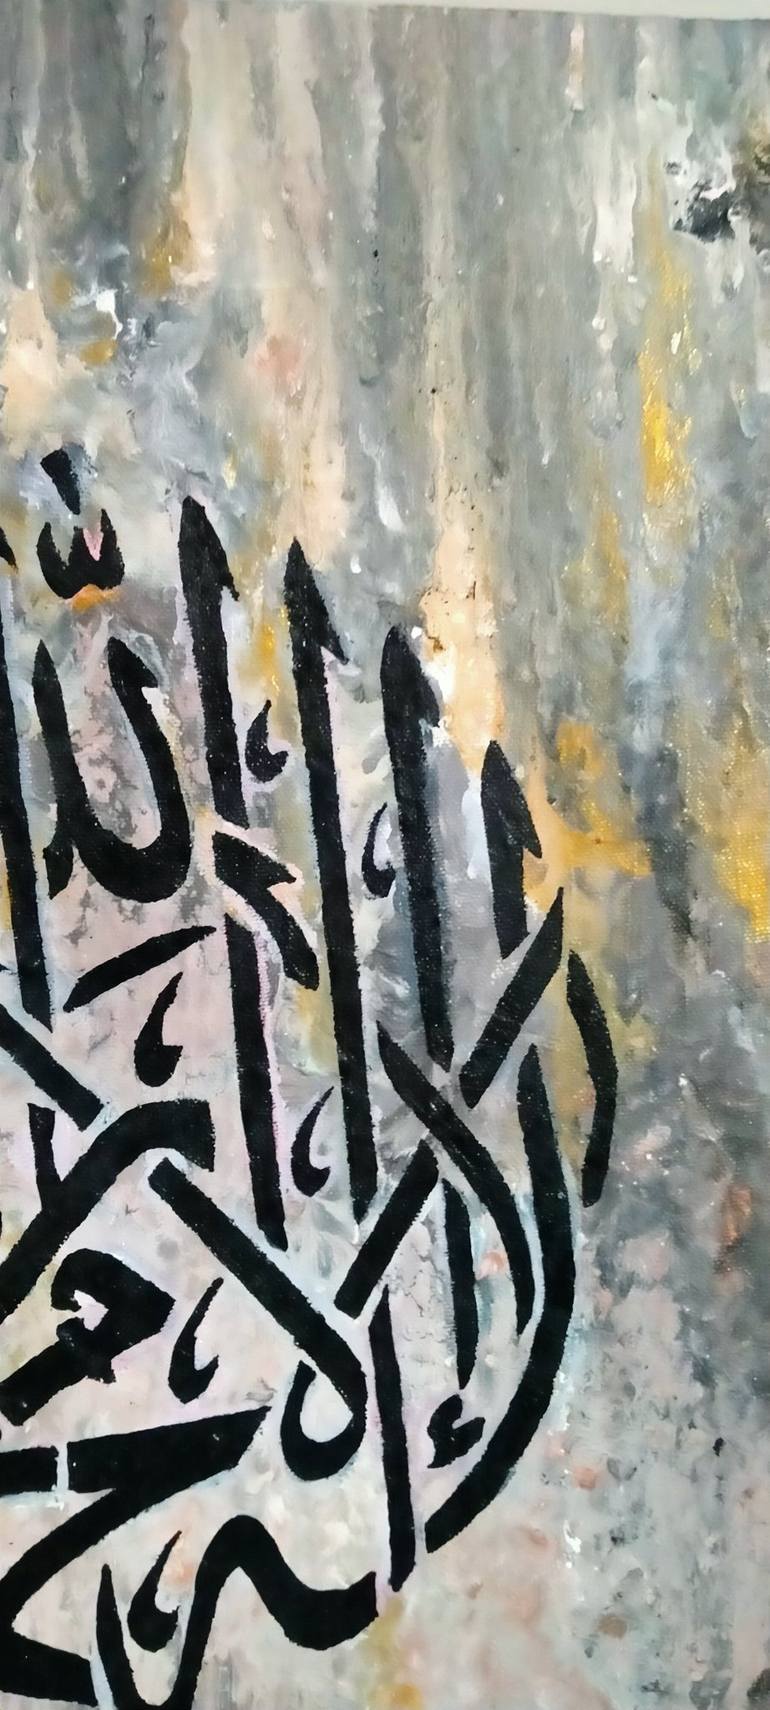 Original Calligraphy Painting by Iqra Farooqui